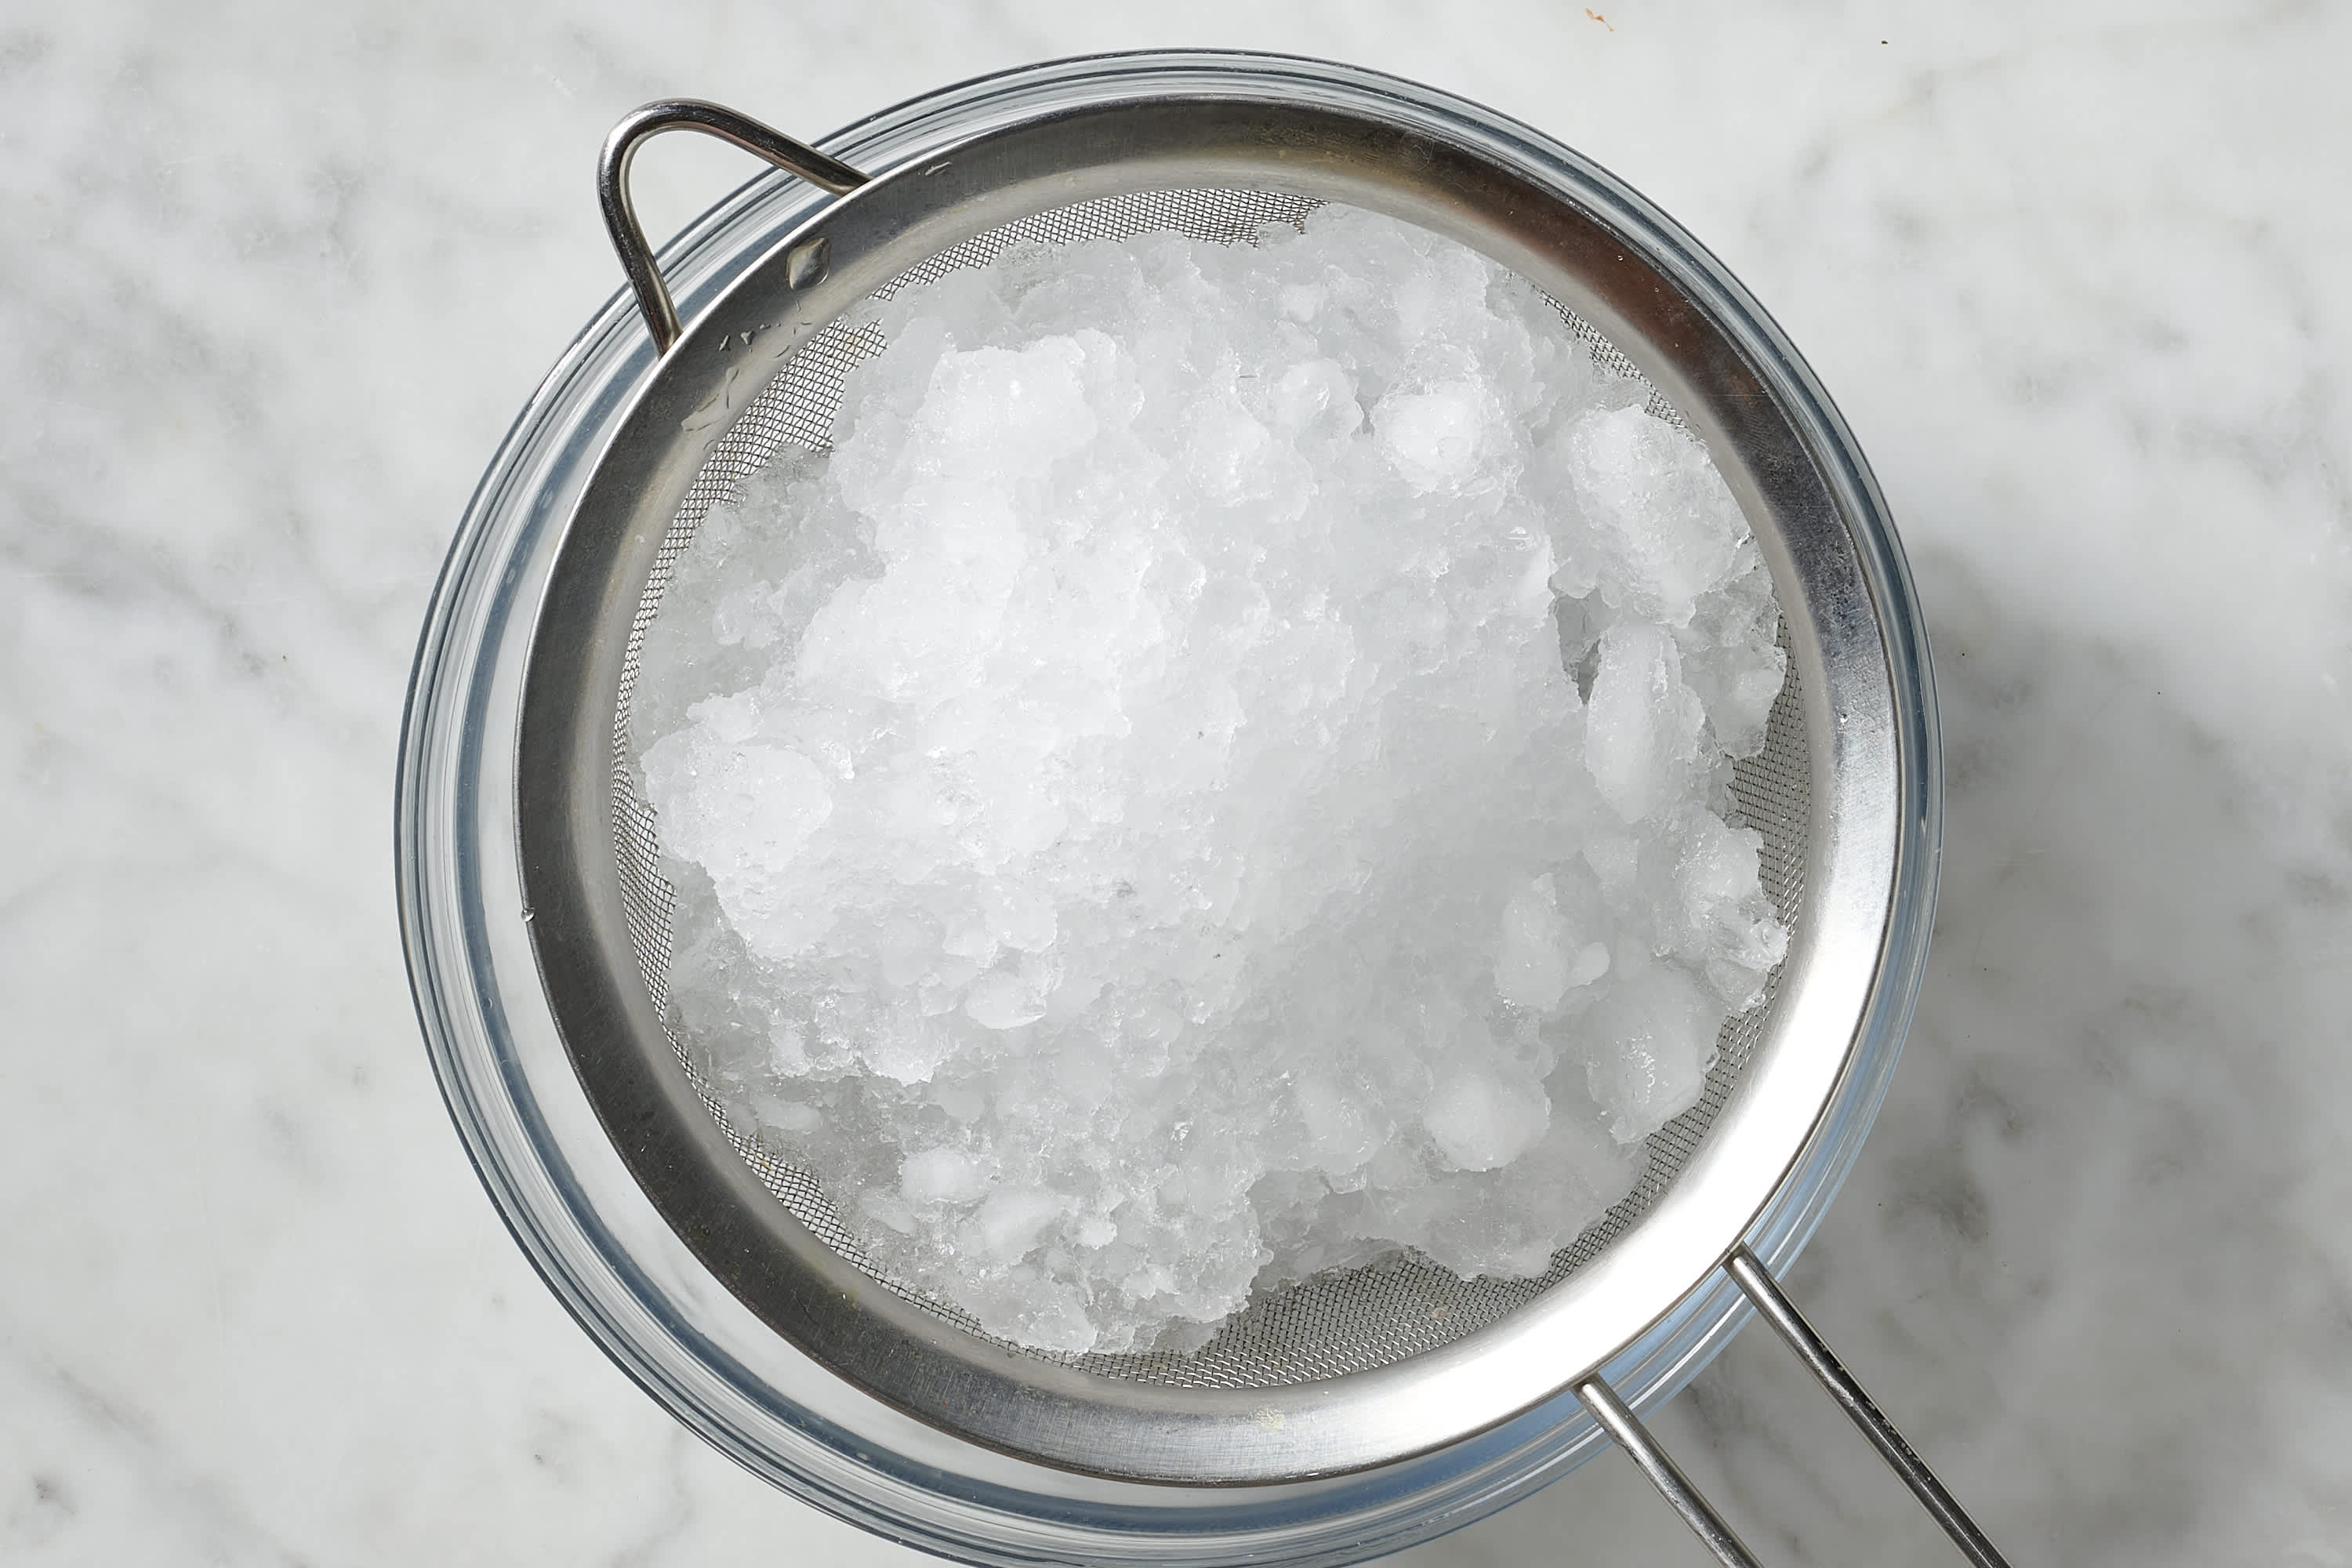 Crushed Ice Is the Easiest Way to Ruin a Glass of Anything